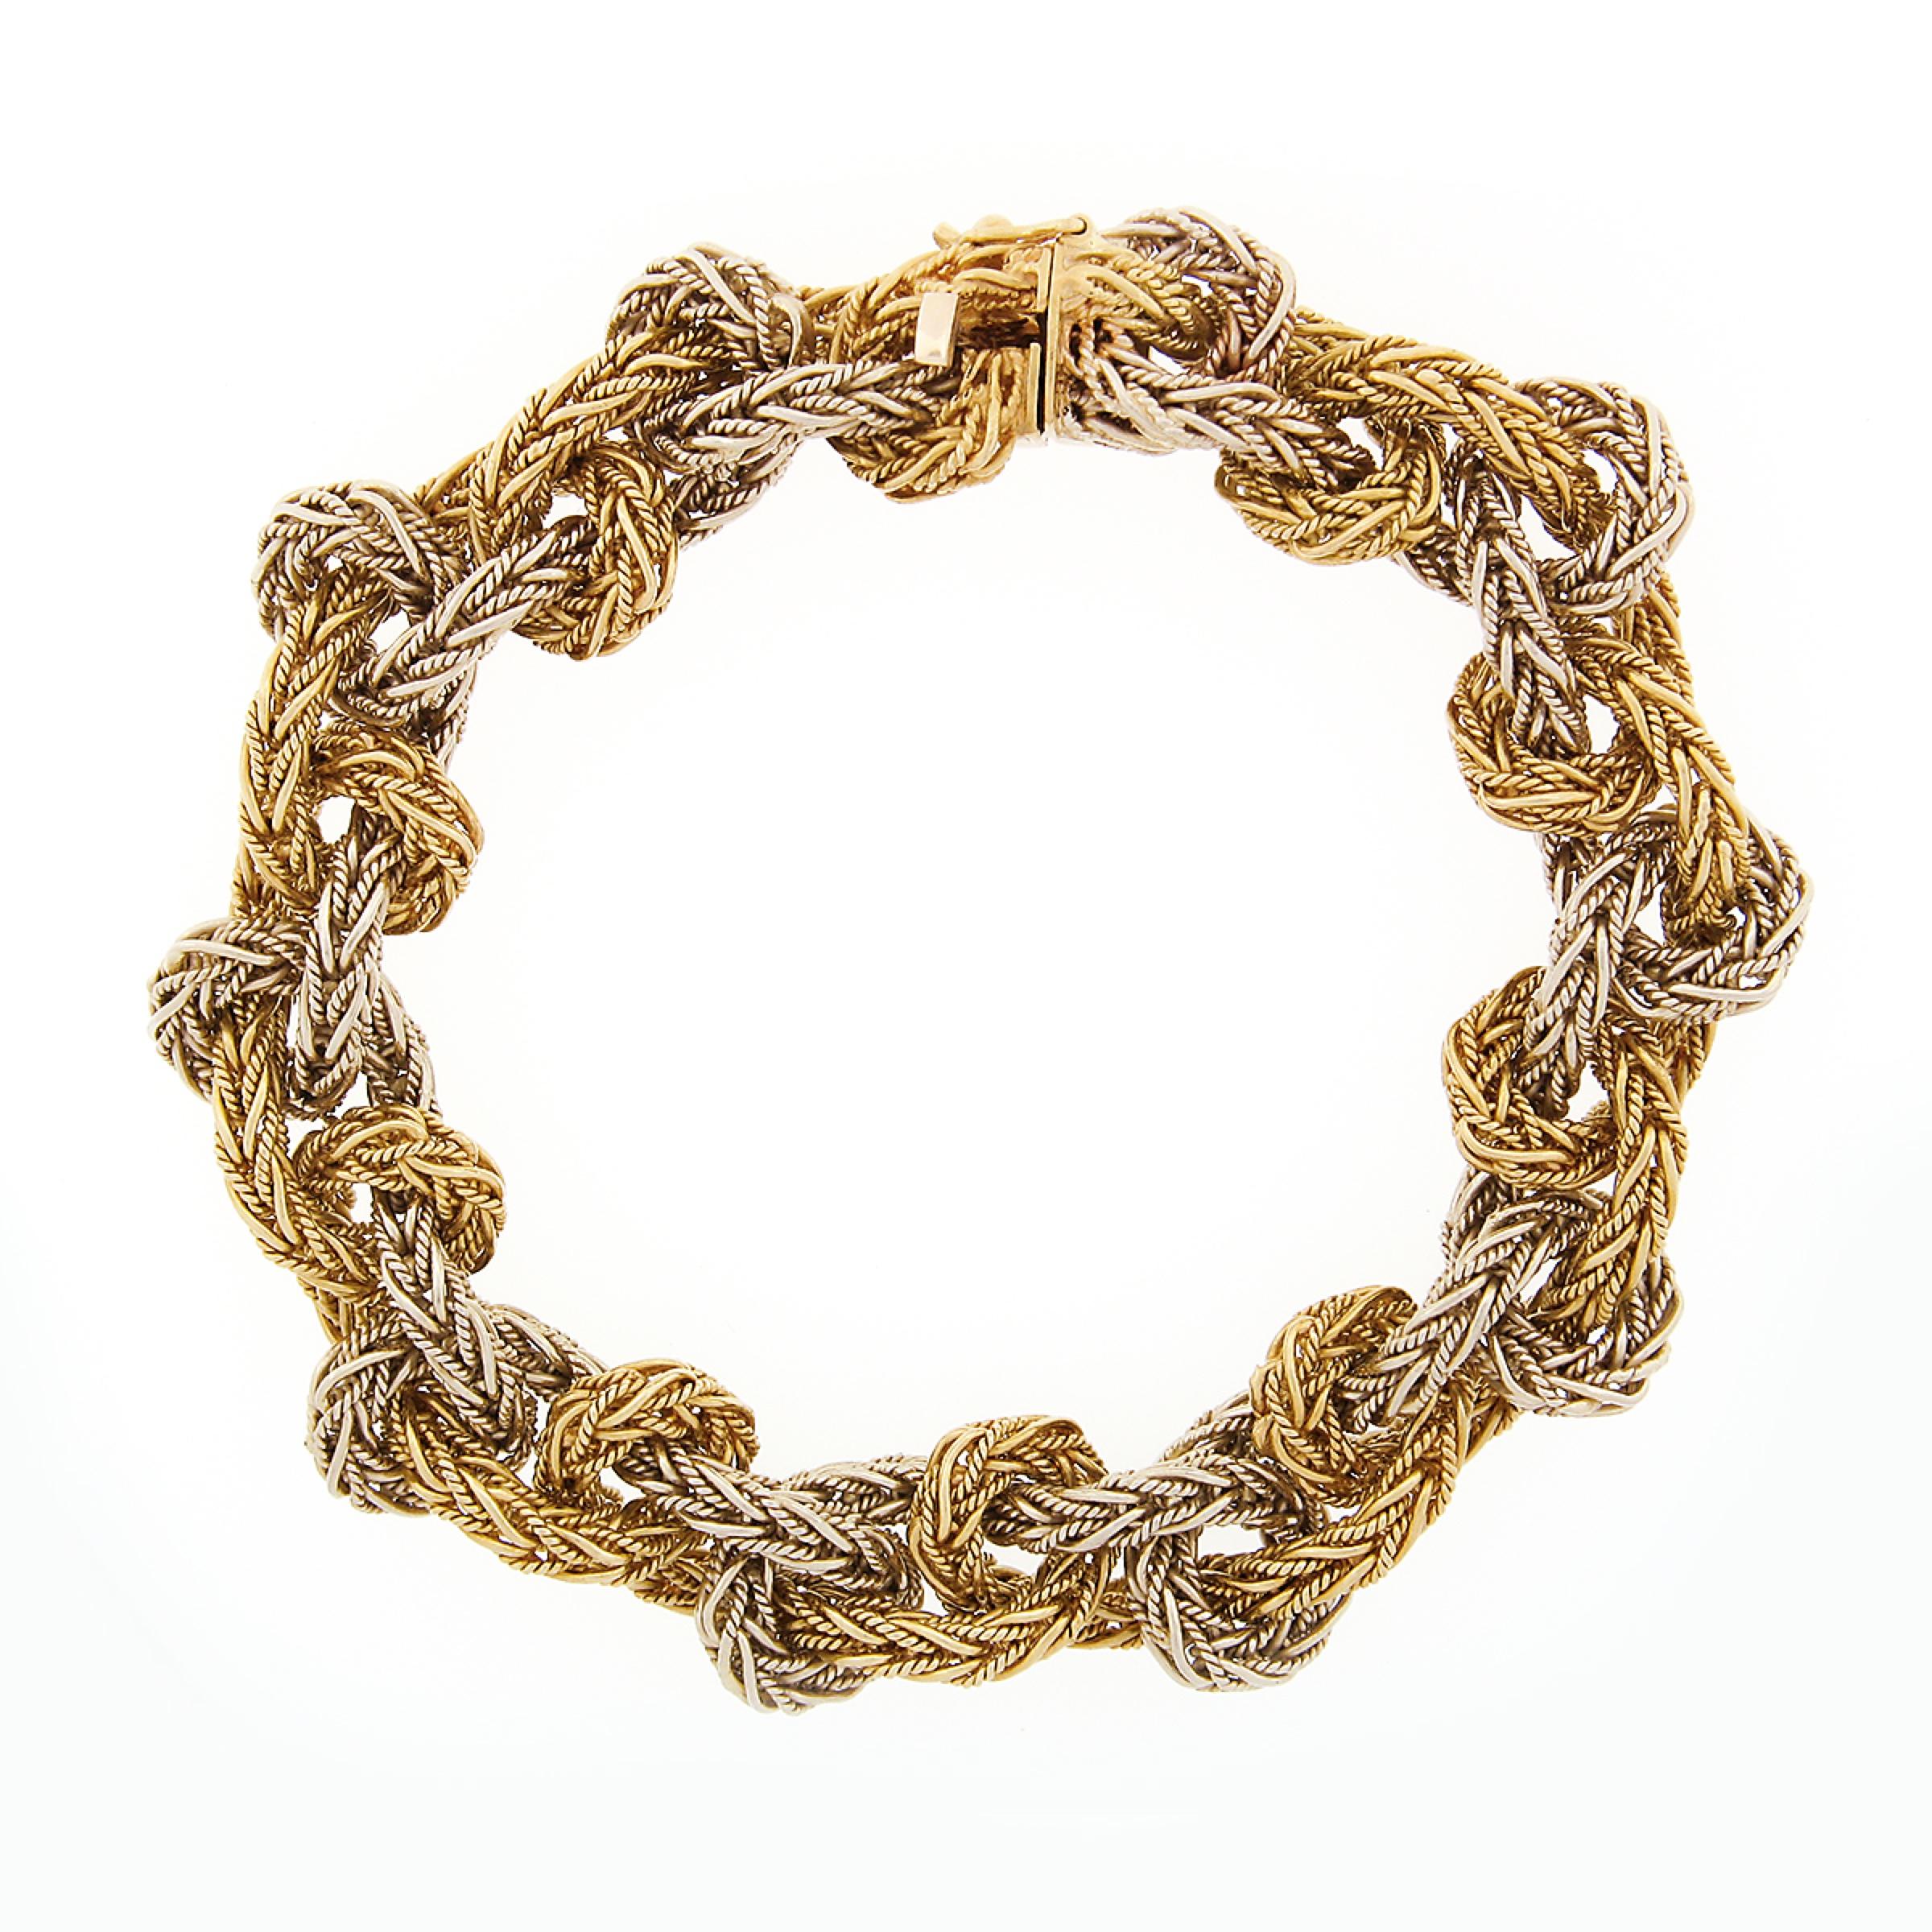 Here we have a beautiful vintage statement bracelet crafted from solid 18k white and yellow gold. The bracelet features wheat link chains in which consist of both polished and twisted wire finish, that are then neatly woven together into a beautiful